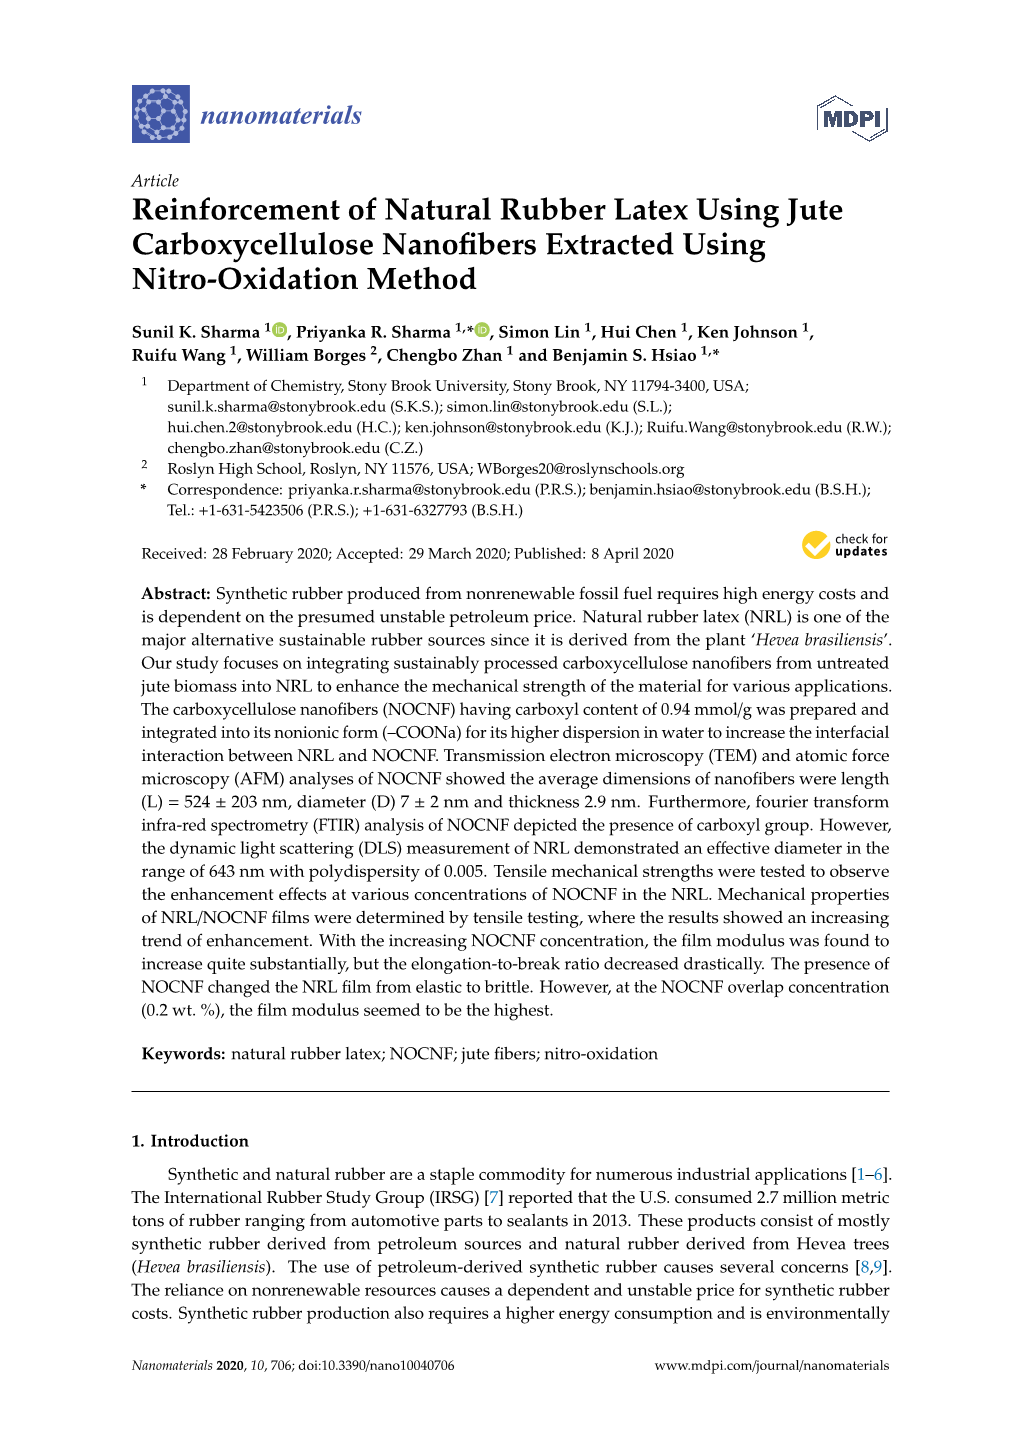 Reinforcement of Natural Rubber Latex Using Jute Carboxycellulose Nanofibers Extracted Using Nitro-Oxidation Method